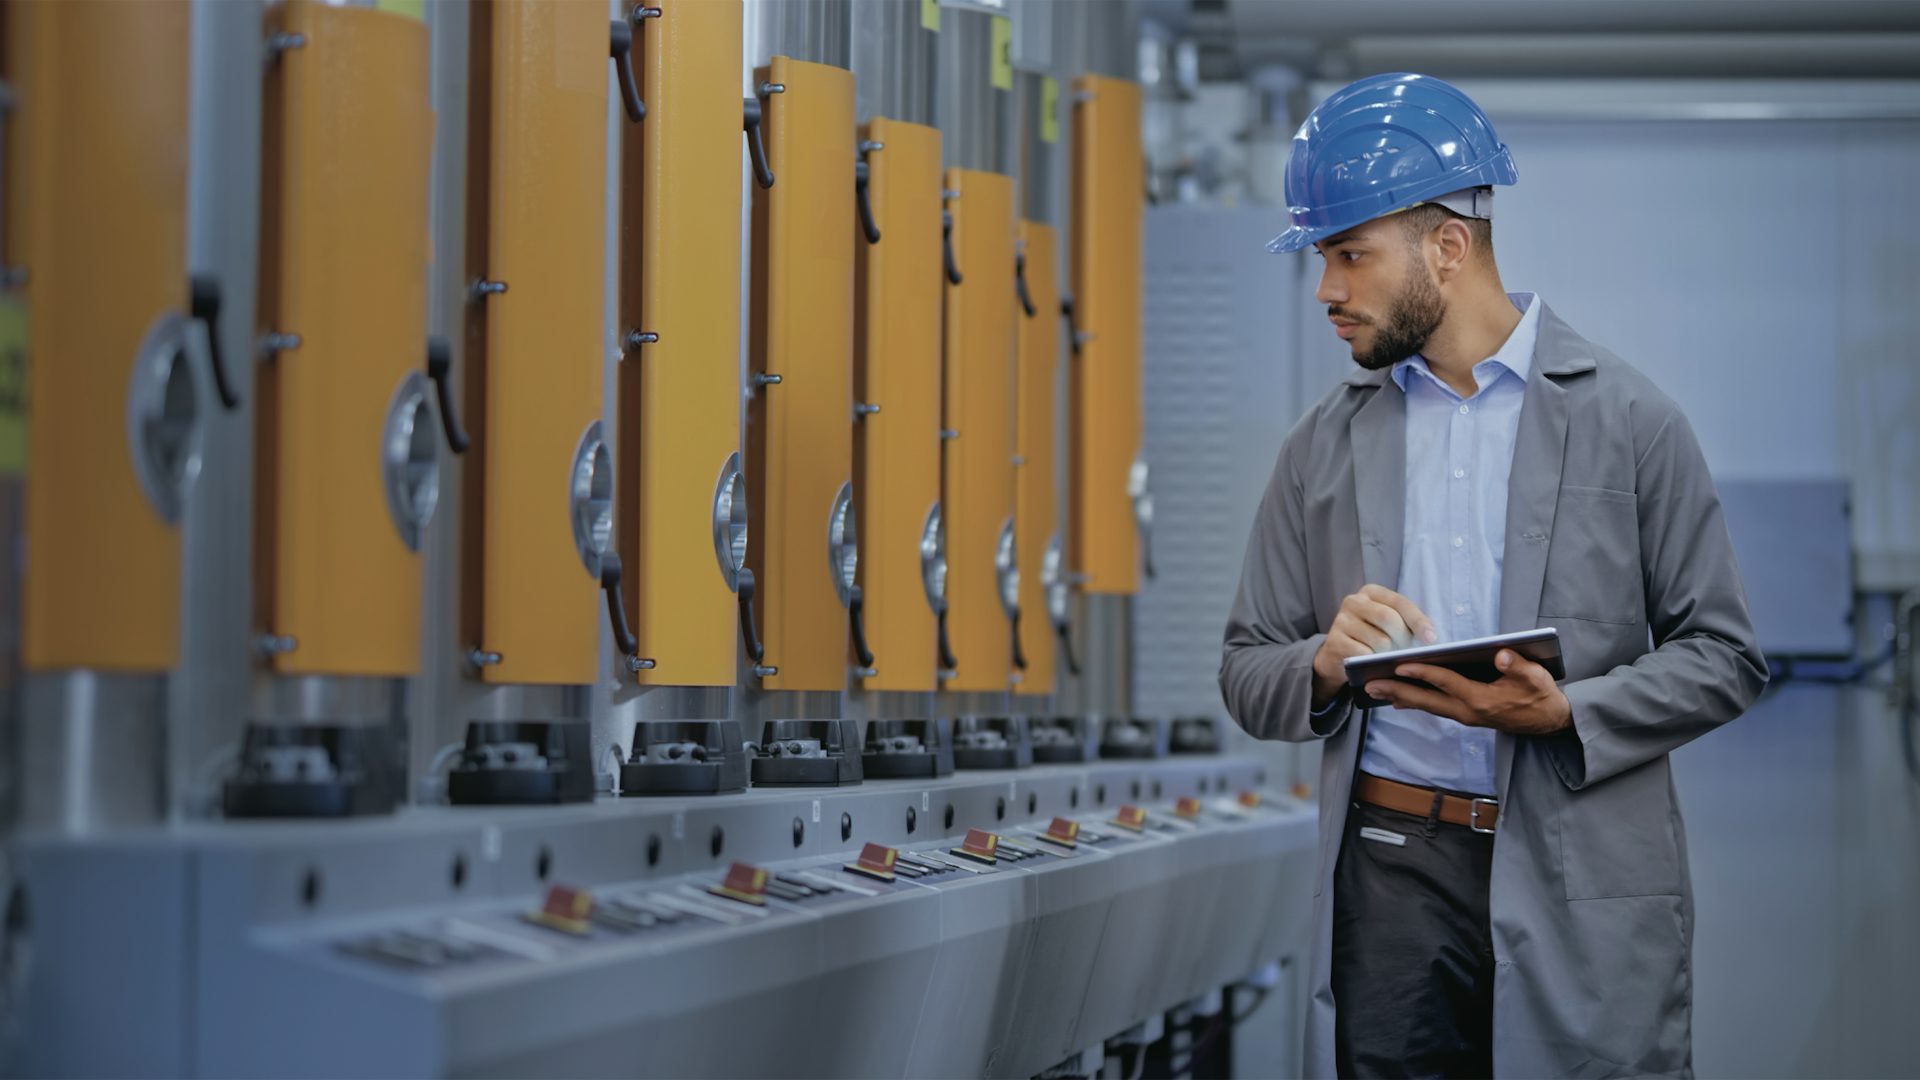 Man wearing a hardhat and holding a tablet inspecting manufacturing machines in an industrial setting.